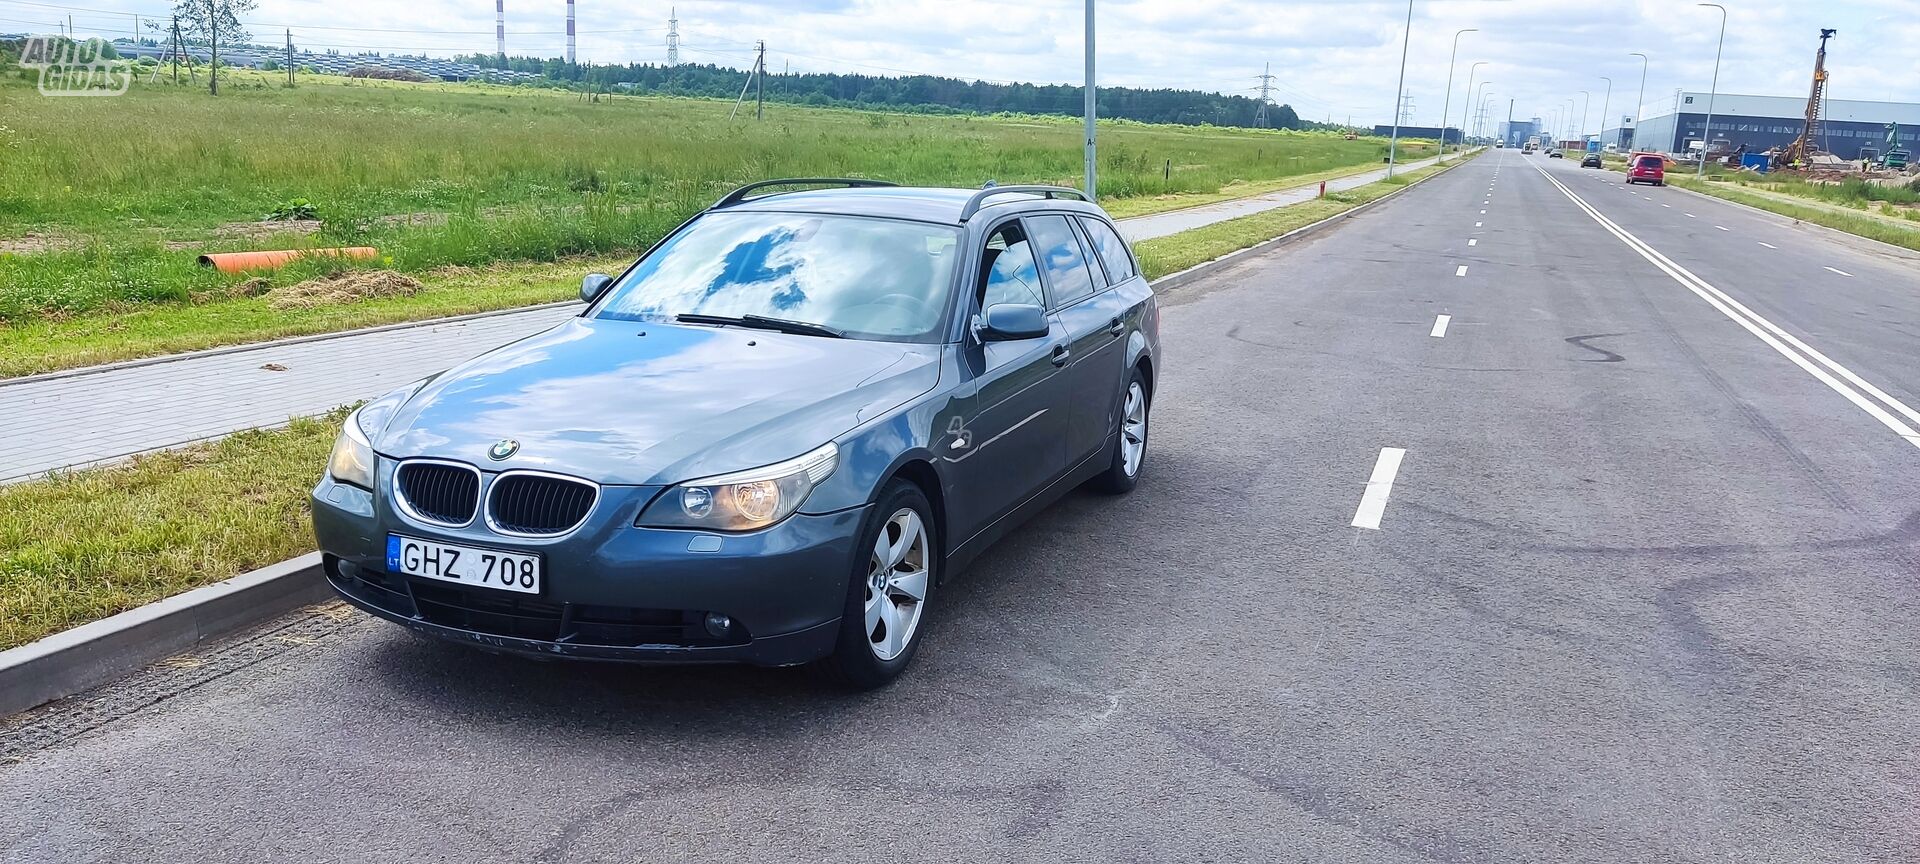 Bmw 520 d Touring 2005 y